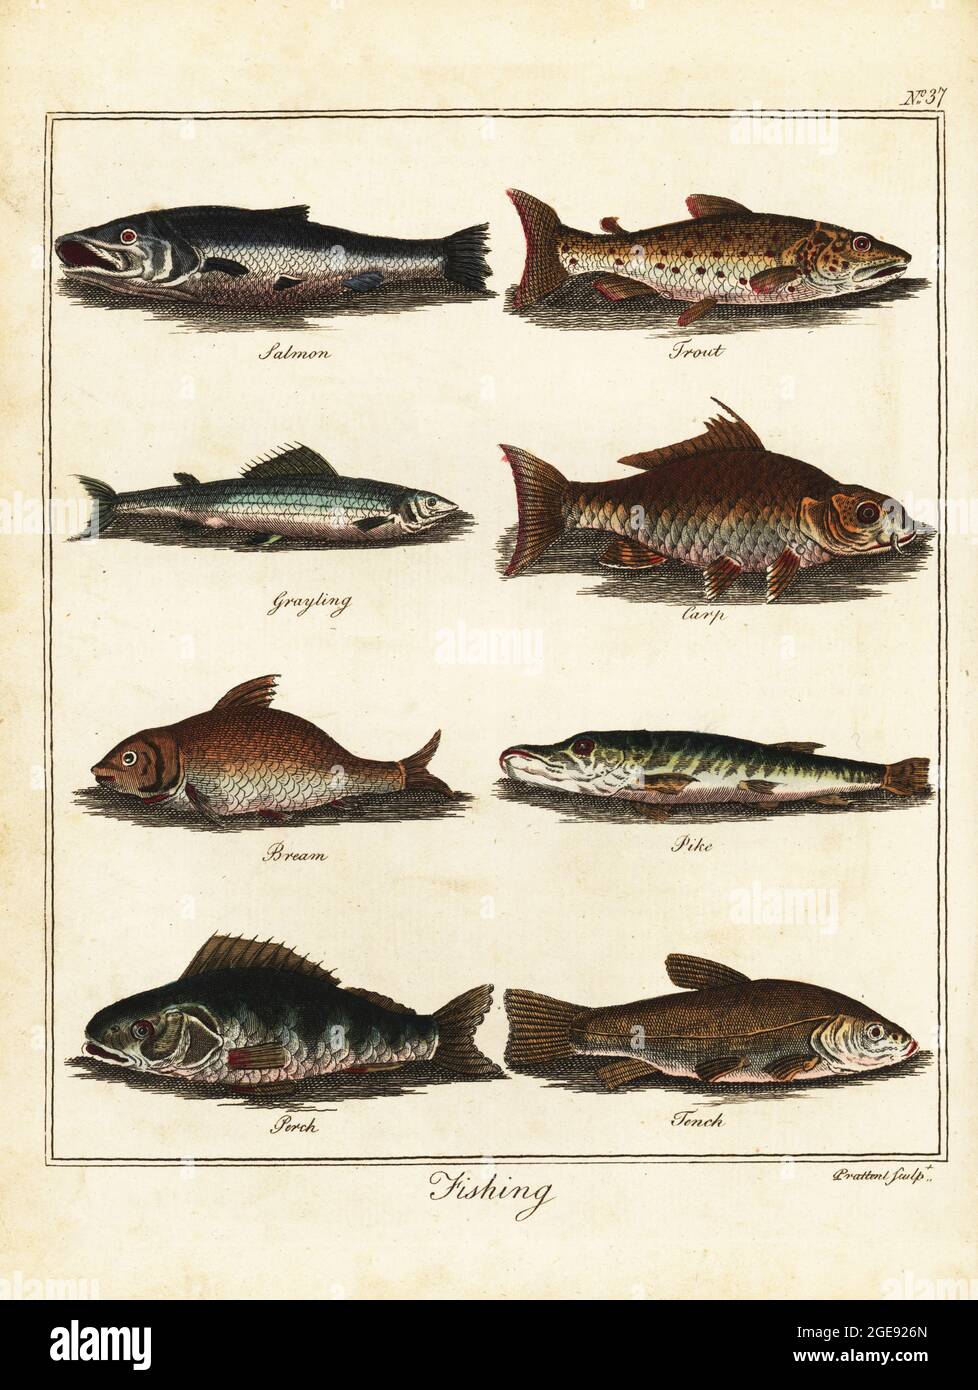 Fishing: salmon, trout, grayling, carp, bream, pike, perch, tench. Handcoloured copperplate engraving by Thomas Prattent from William Augustus Osbaldiston’s The British Sportsman, or Nobleman, Gentleman and Farmer’s Dictionary of Recreation and Amusement, J. Stead, London, 1792. Stock Photo